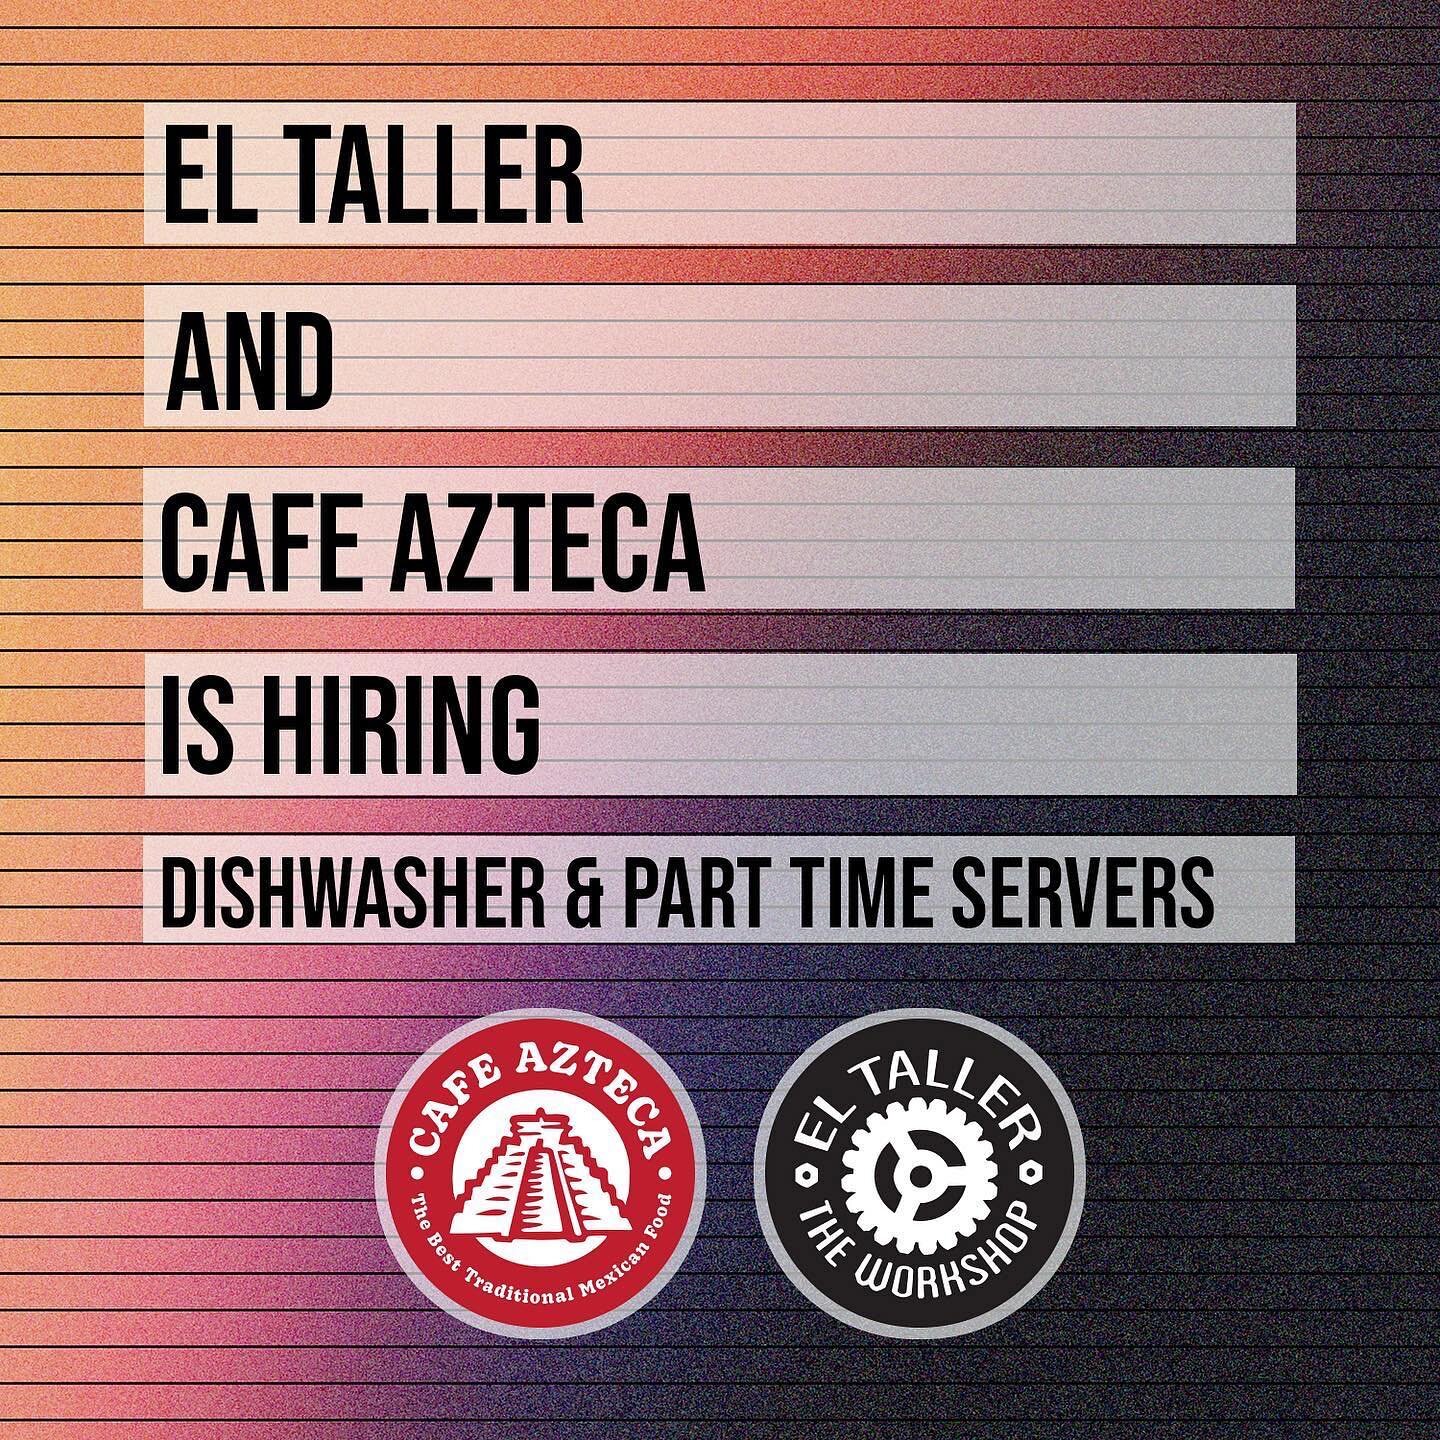 El Taller &amp; Cafe Azteca is hiring! 

We&rsquo;re looking for a dishwasher for evening hours 5:00 to 10:00 Tuesday to Saturday. Some heavy lifting and stairs. This job is a workout. Starting pay is $15. 

Also looking for a few part time servers. 